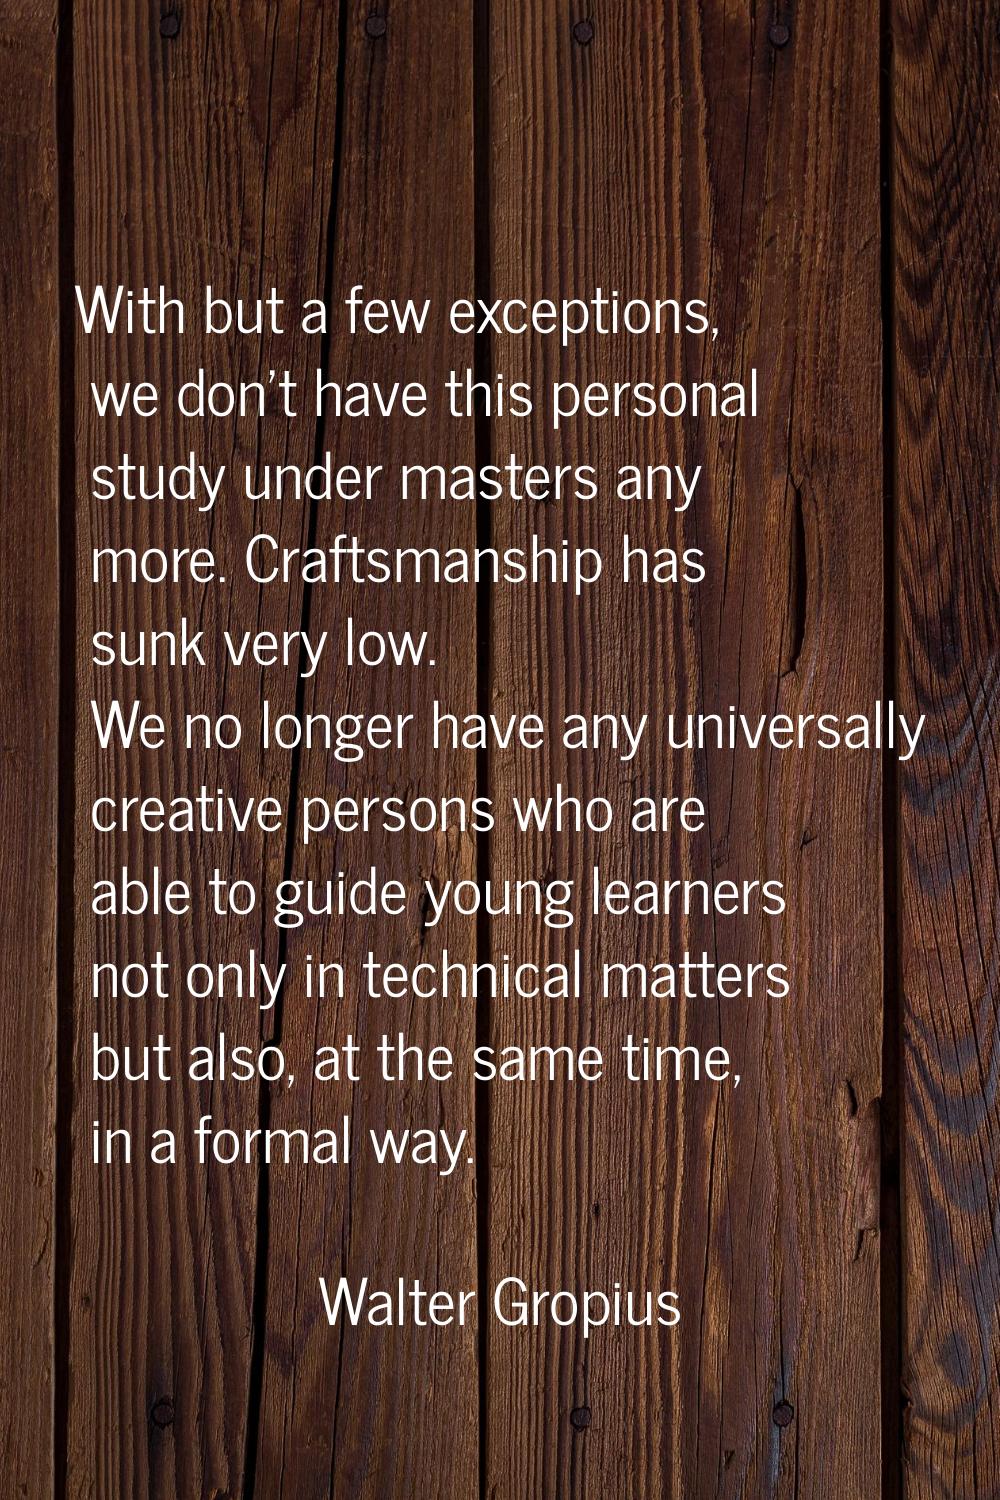 With but a few exceptions, we don't have this personal study under masters any more. Craftsmanship 